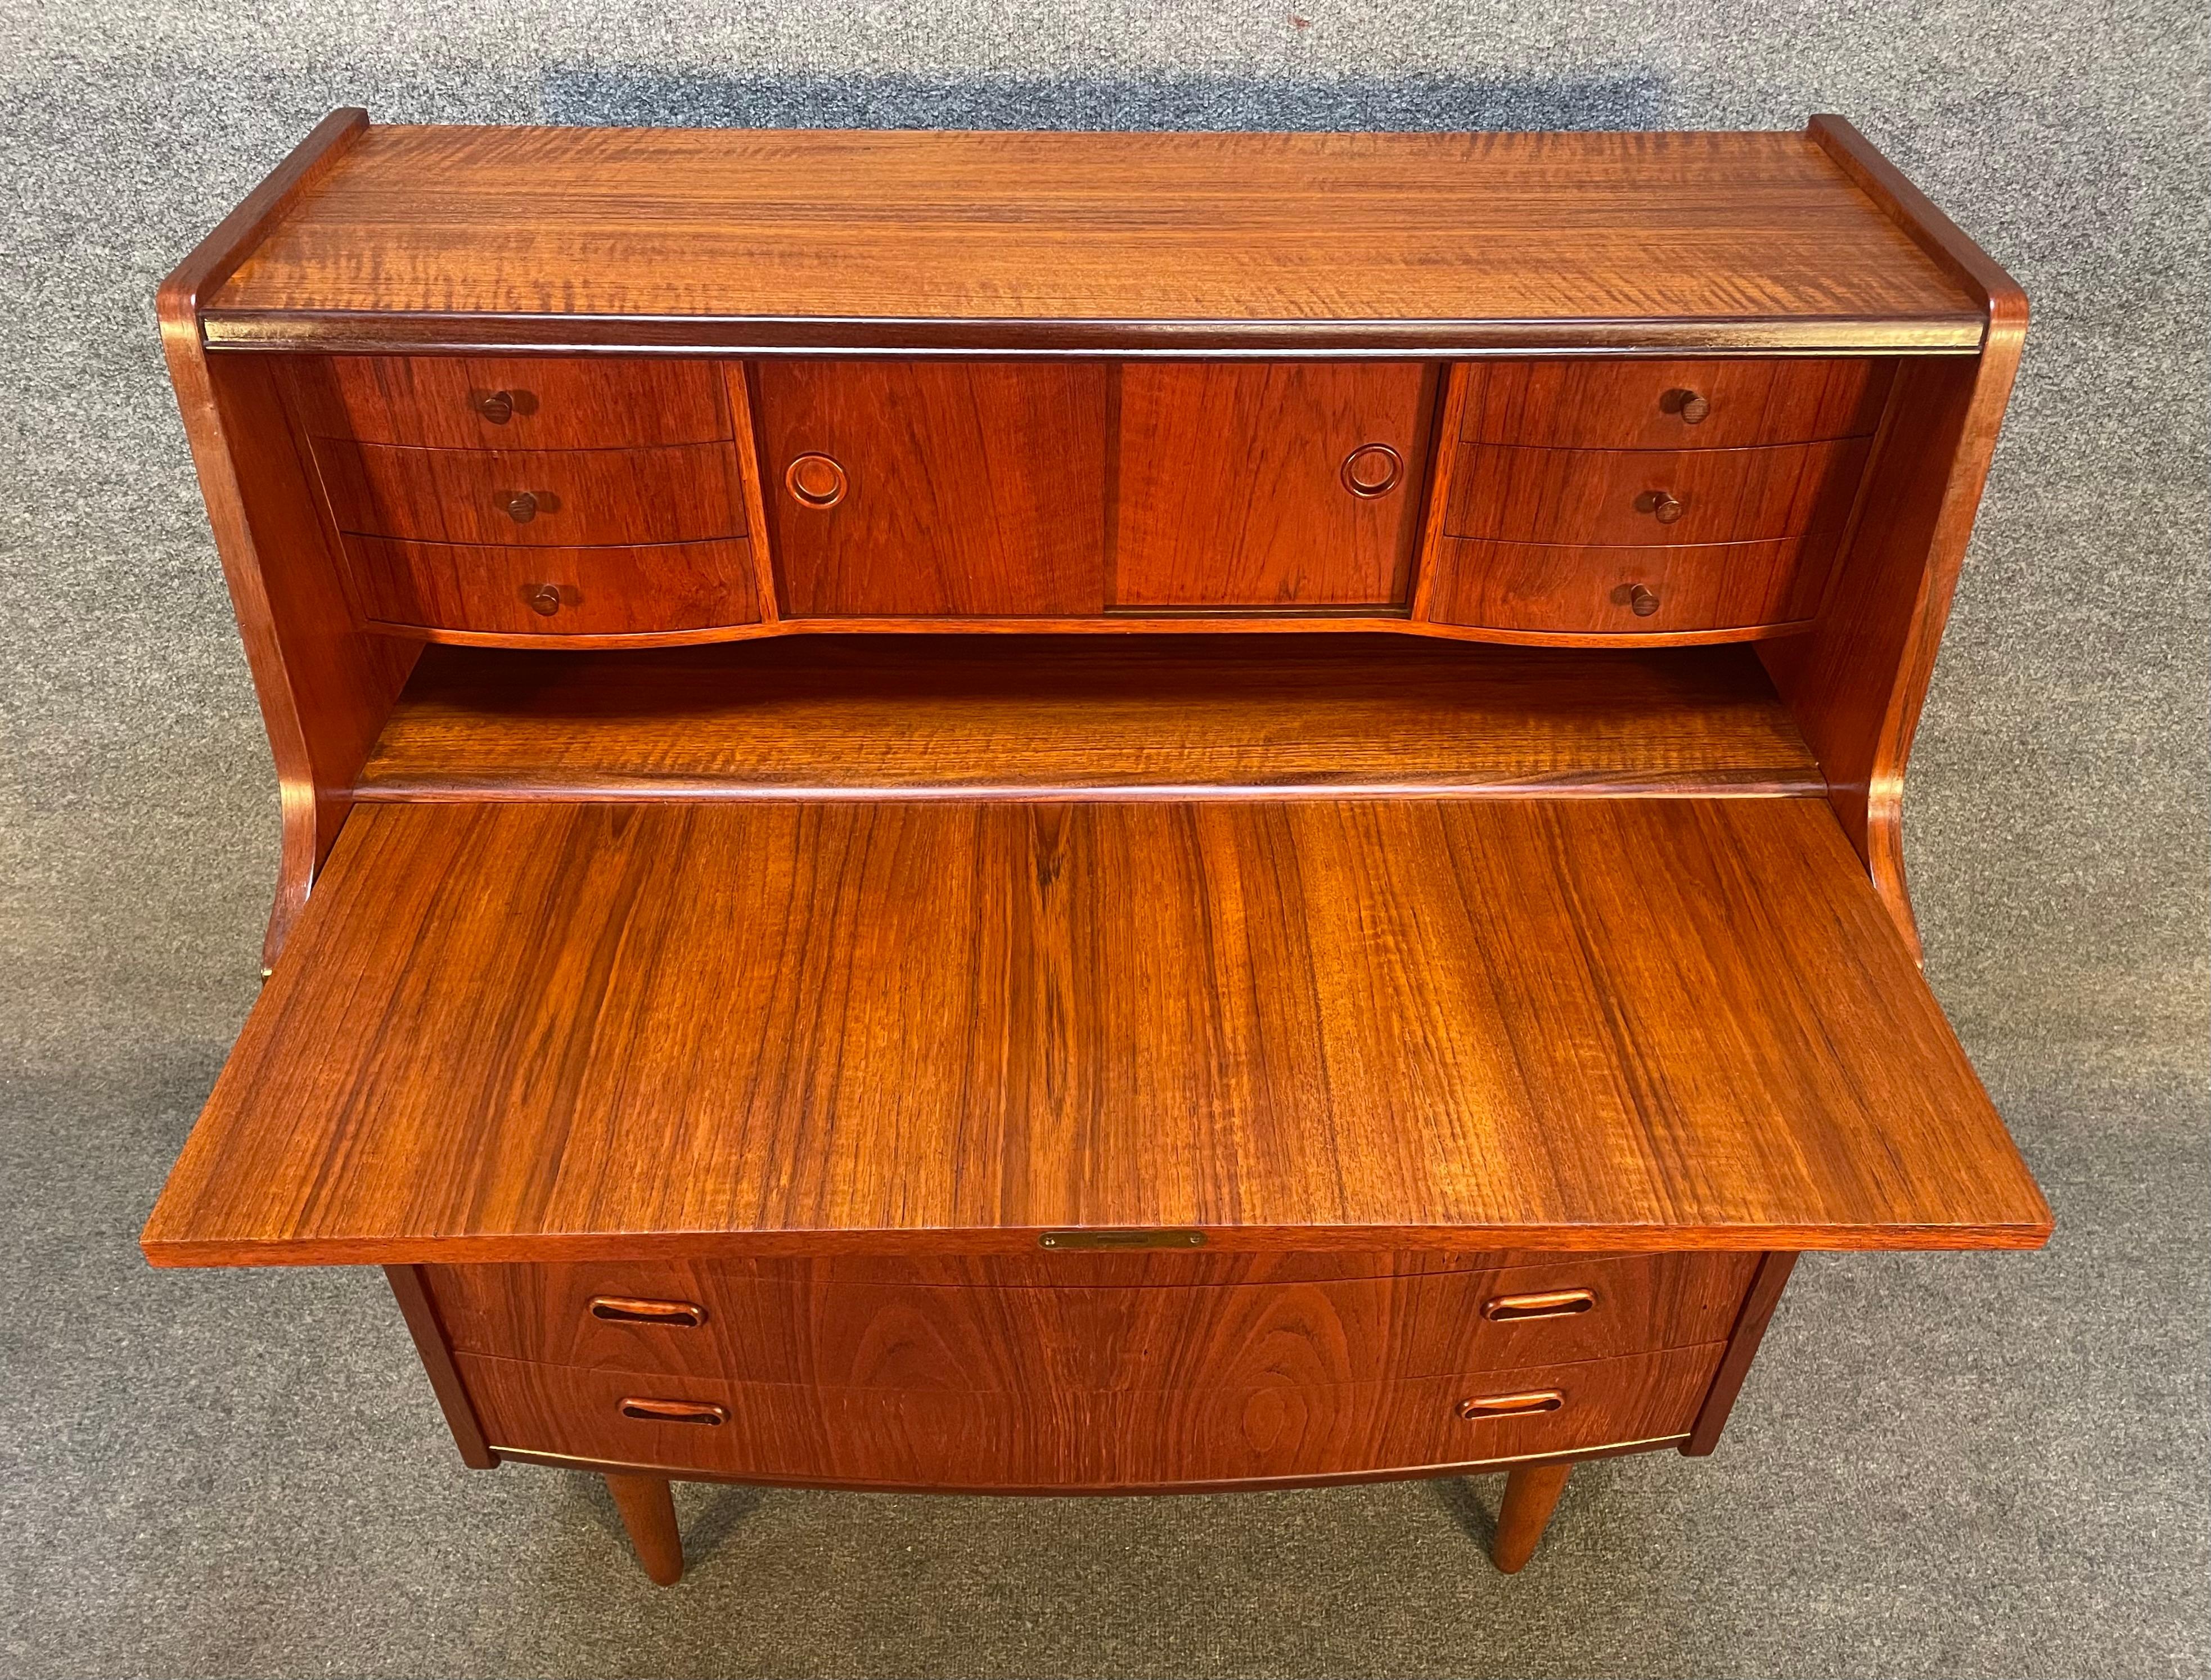 Here is a beautiful scandinavian modern secretary desk in teak wood manufactured by Poul Jessen Mobelfabrik in Denmark in the 1960s.
This lovely versatile piece, recently imported from Europe to California before its refinishing, features a vibrant